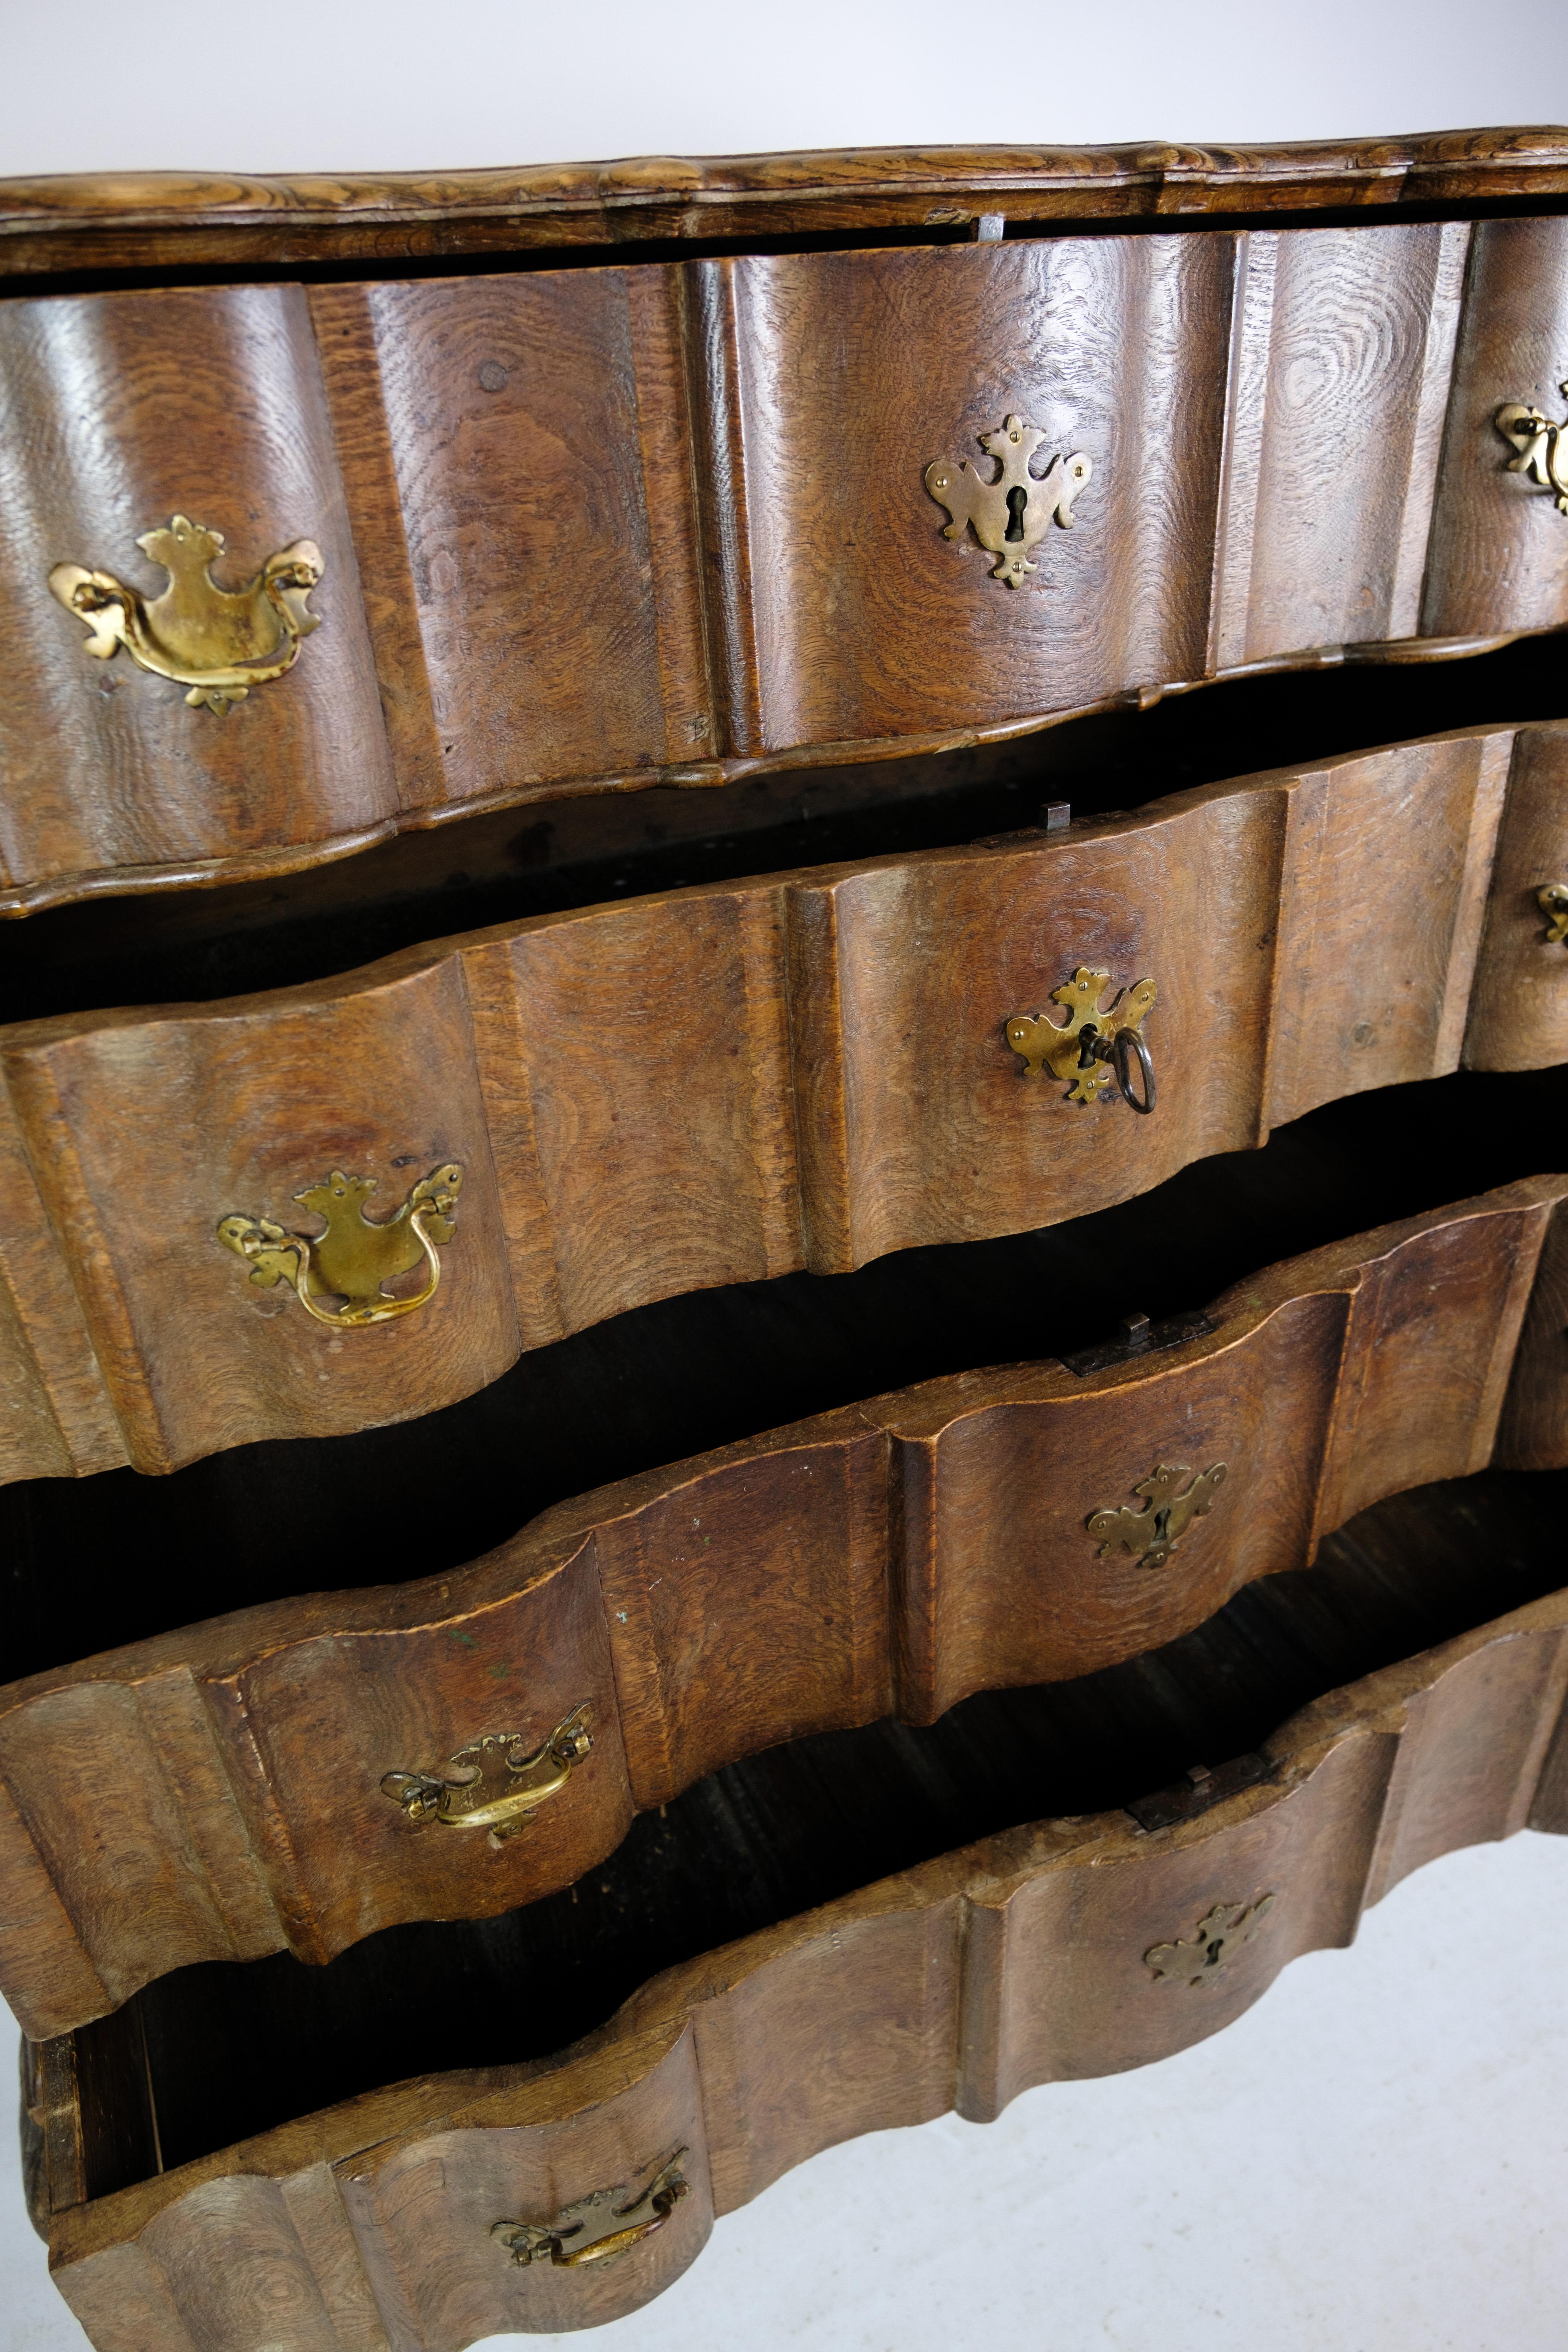 Late 18th Century Baroque chest of drawers in oak with brass fittings from the 1780